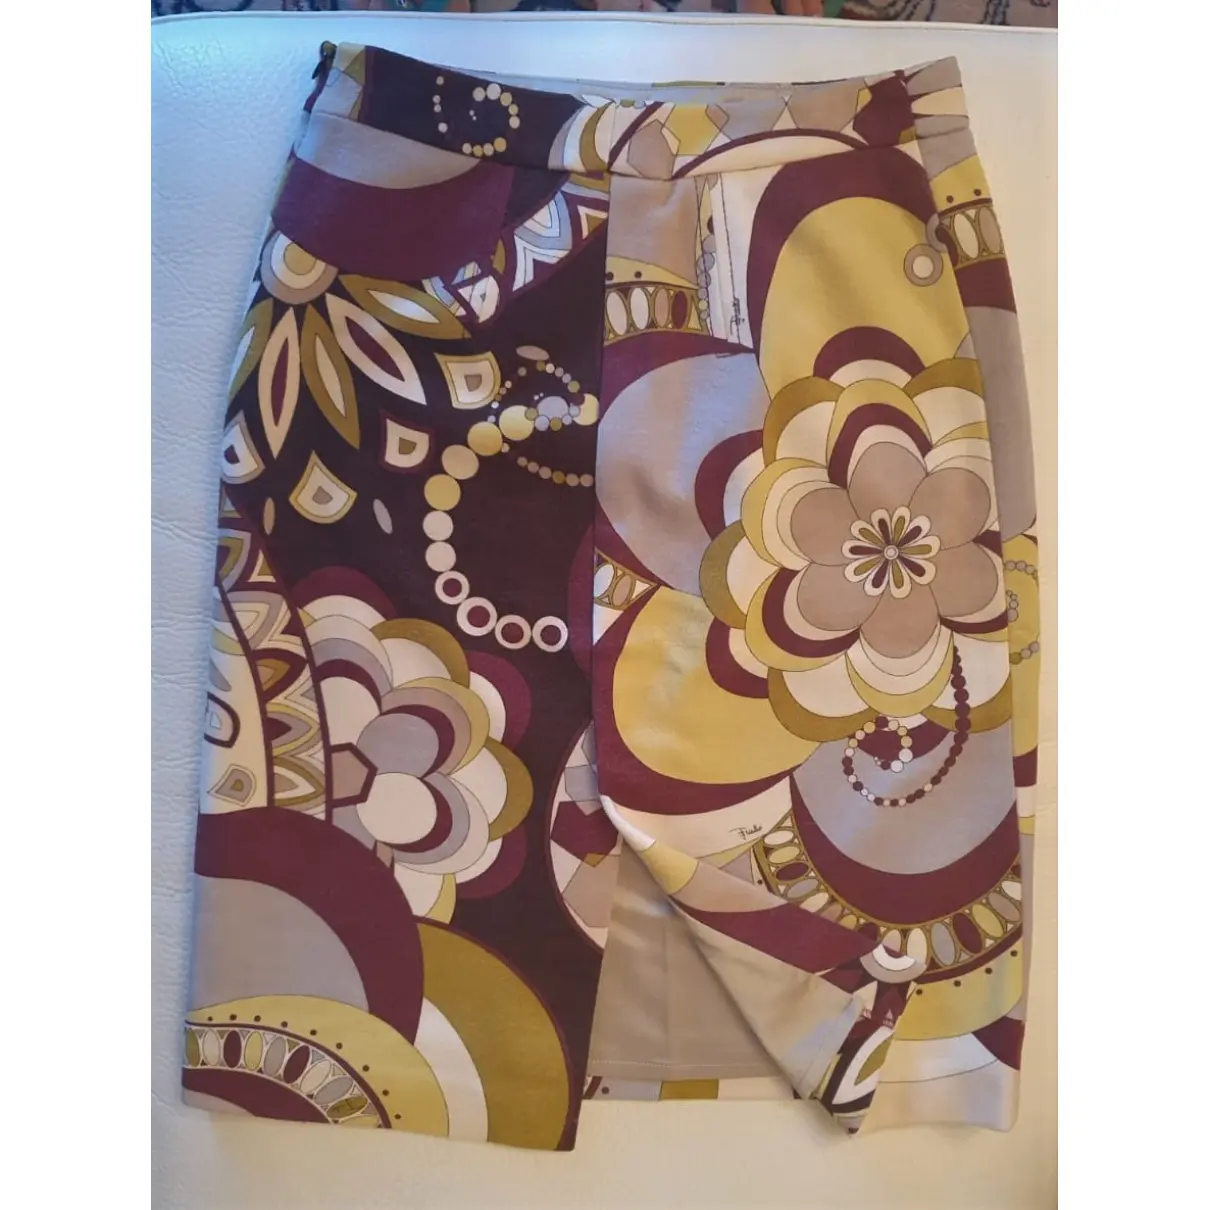 Buy Emilio Pucci Wool mid-length skirt online